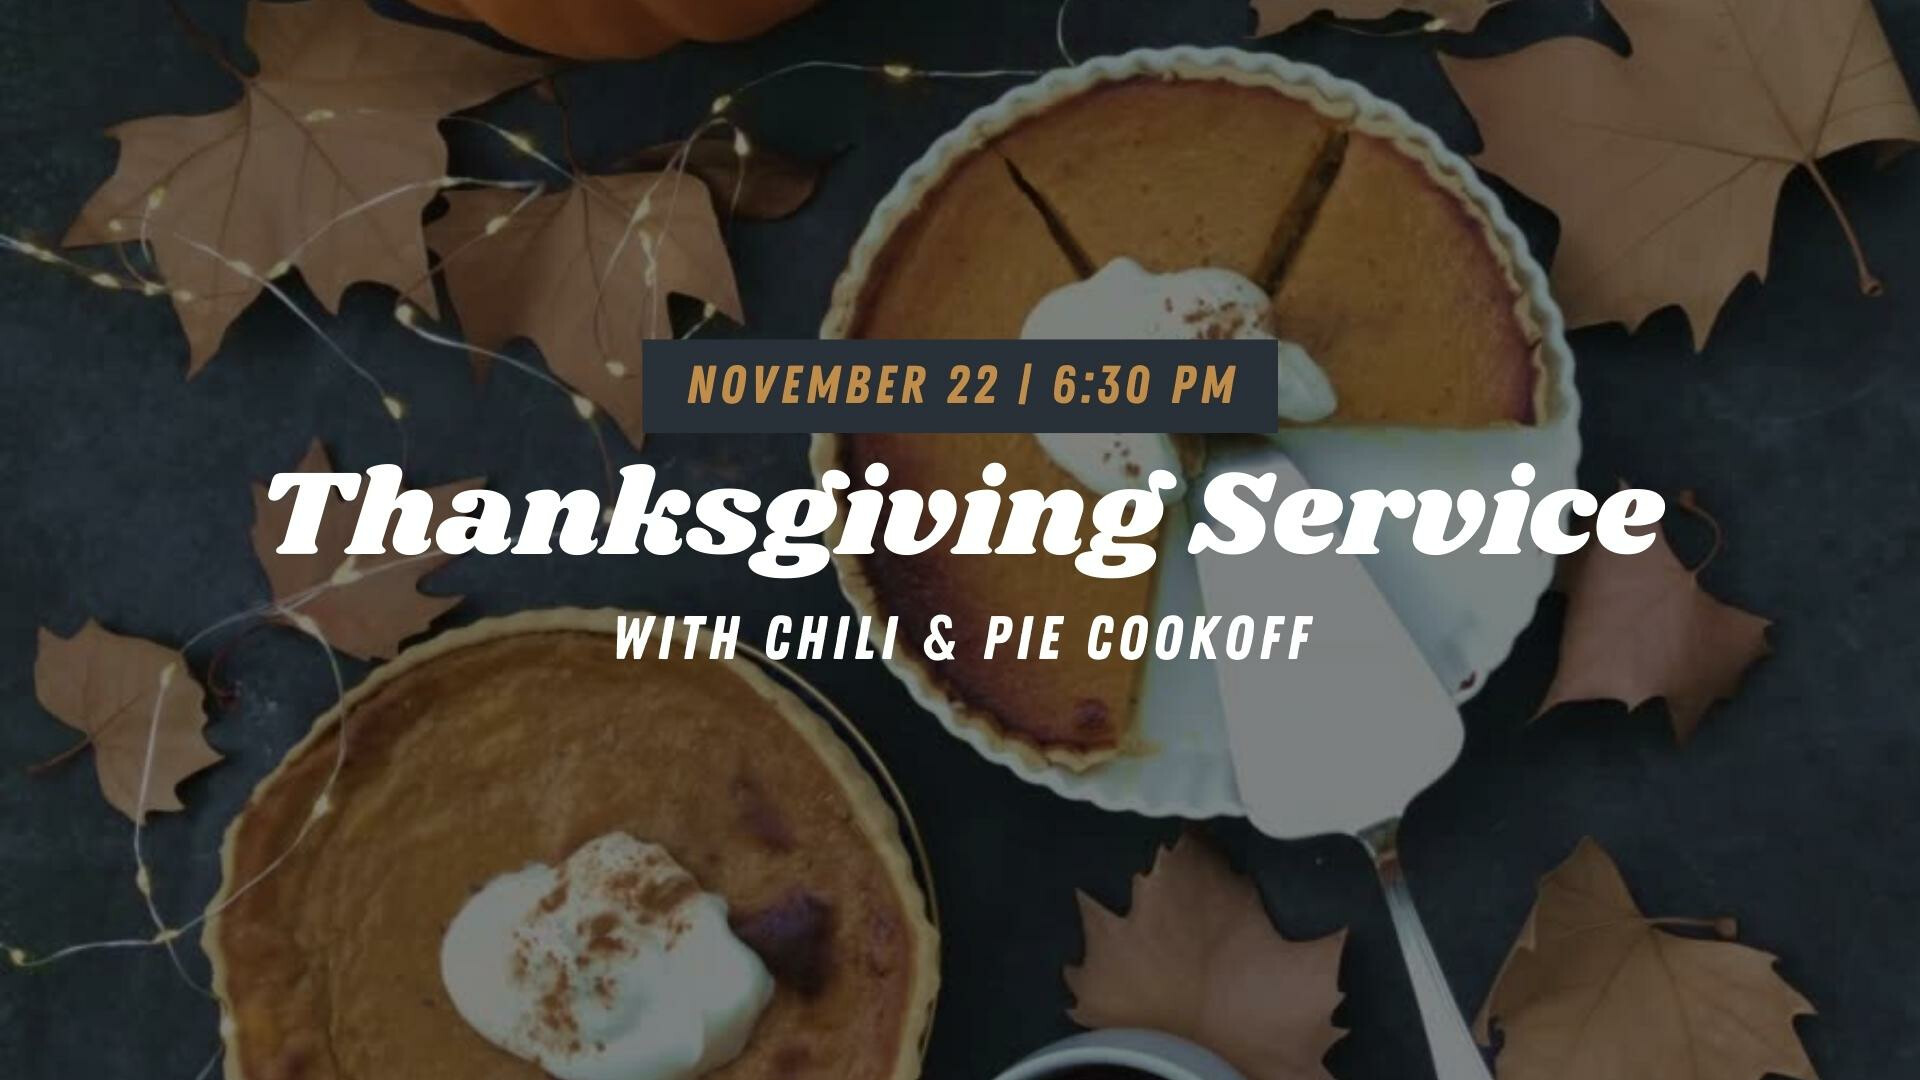 Thanksgiving Service and Cook-off